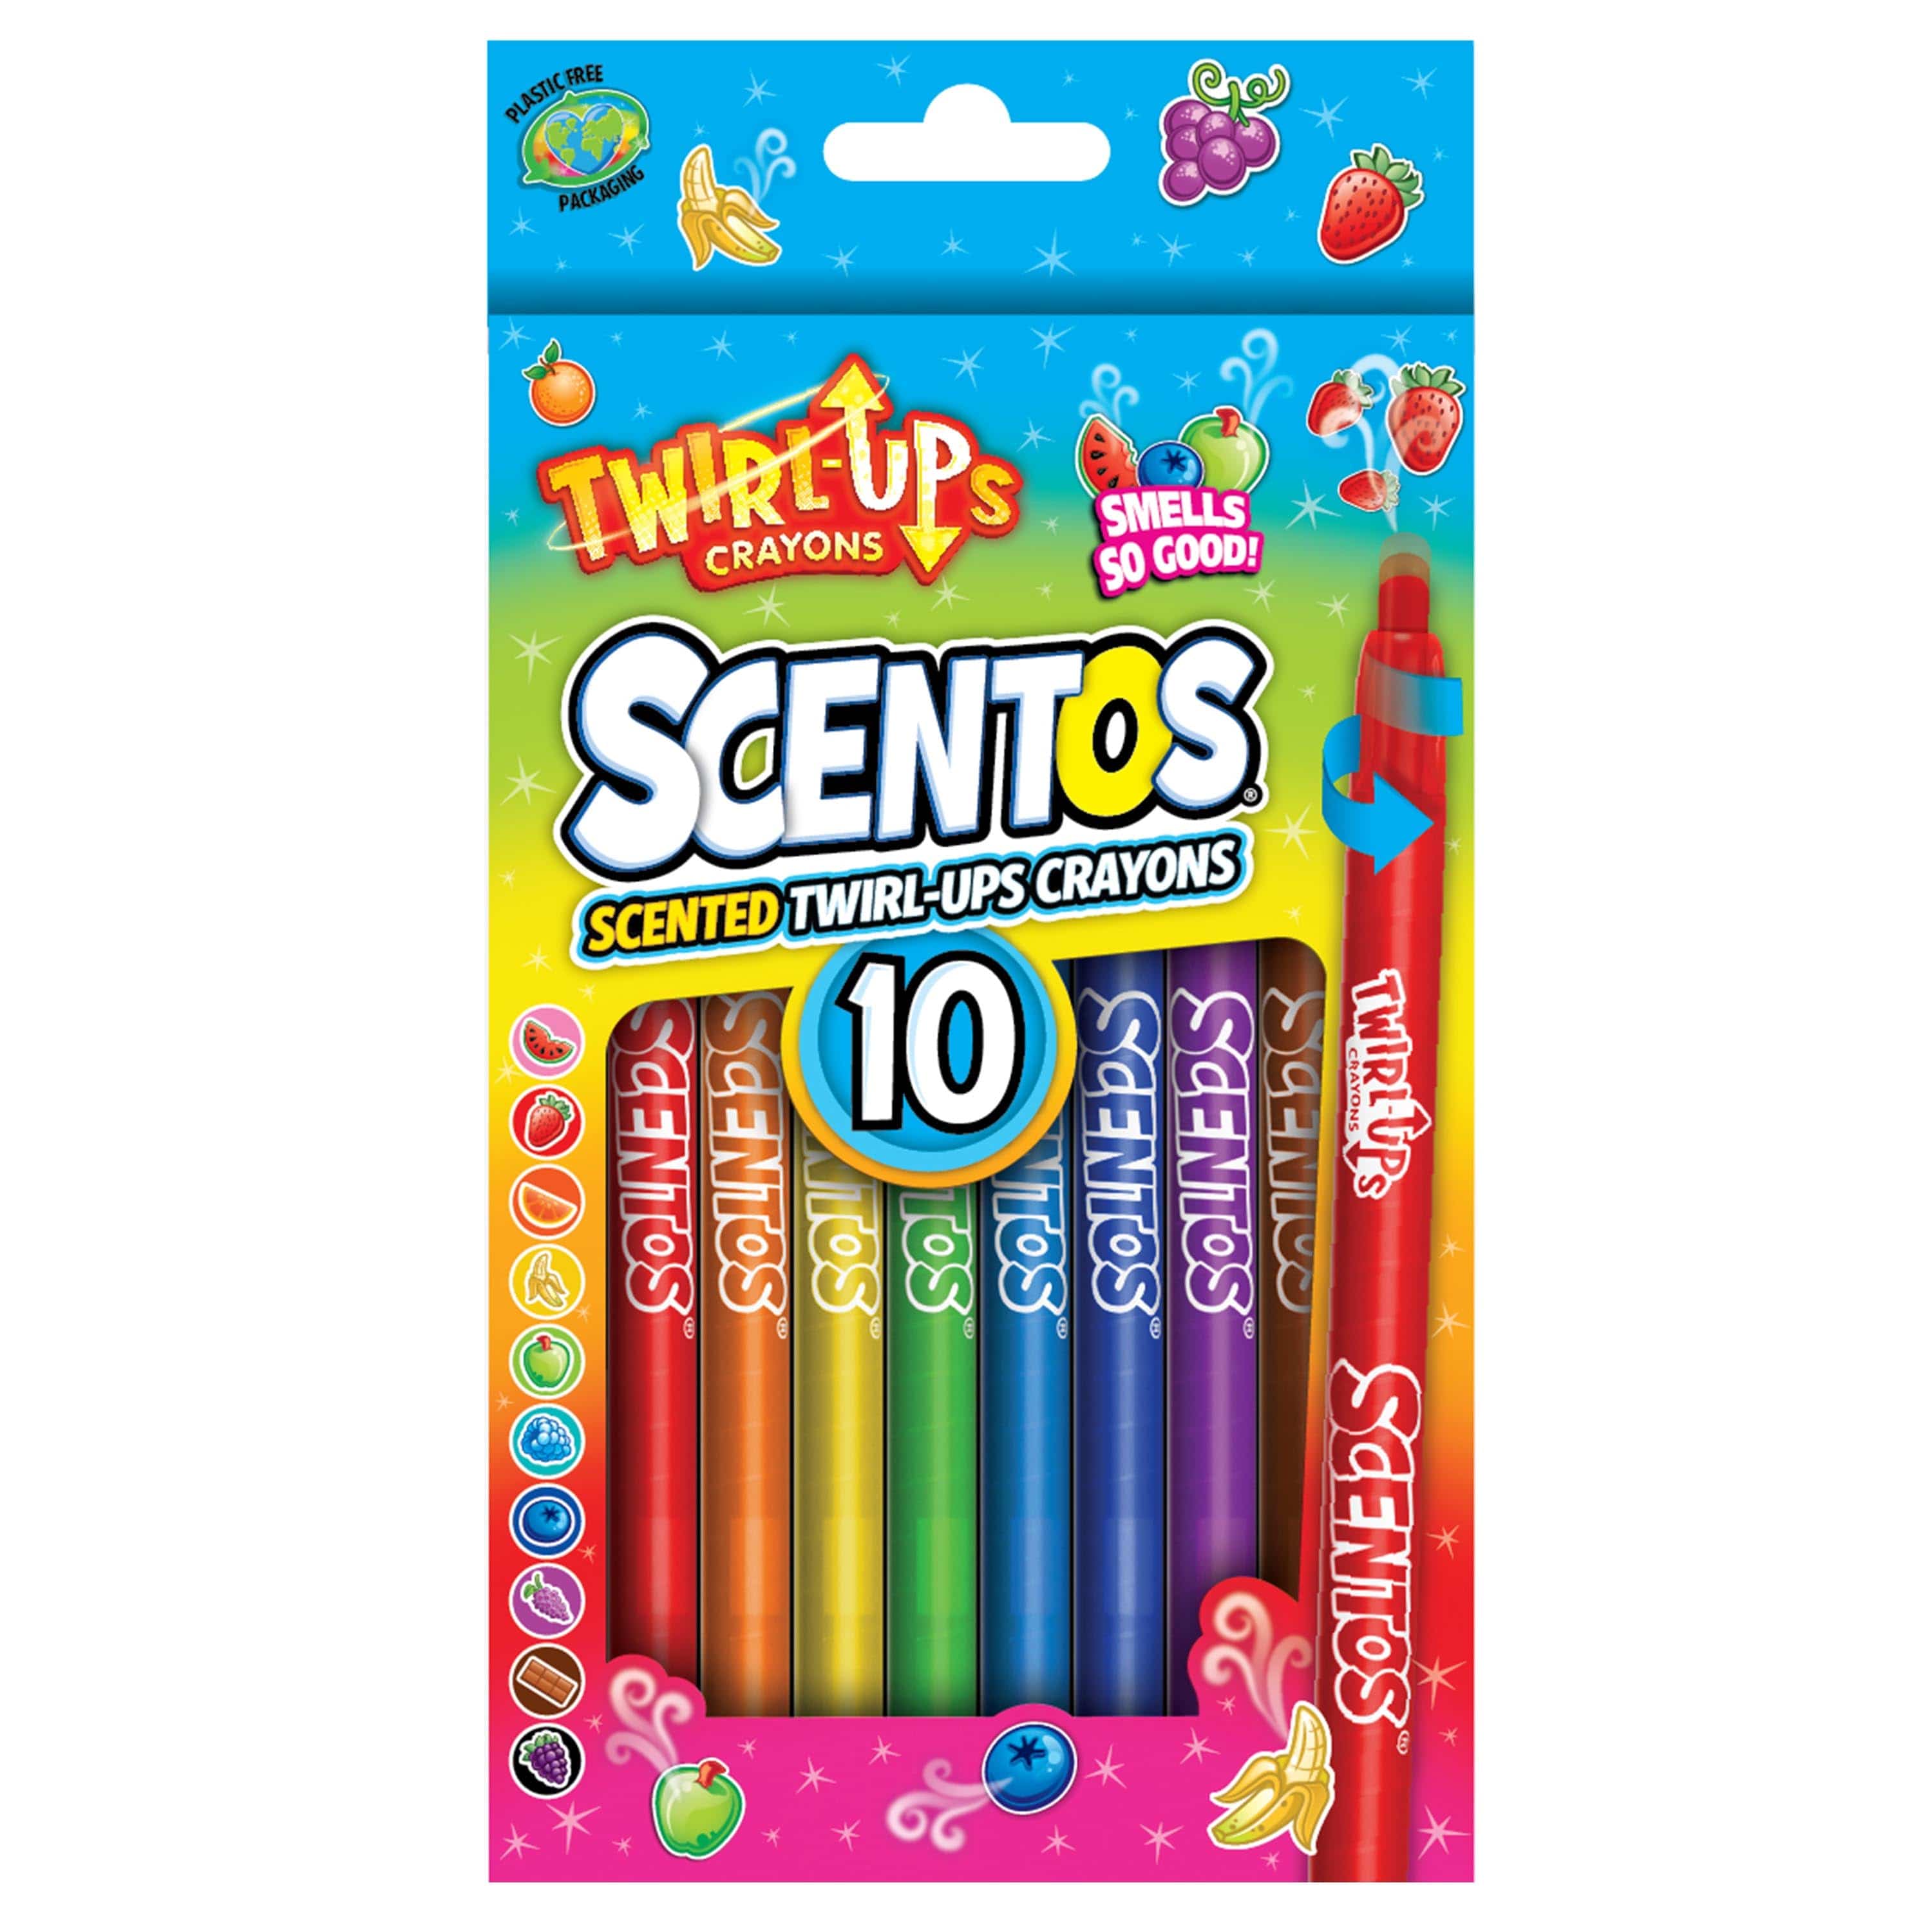 Scentos Scented Fine Line 24 Count Markers